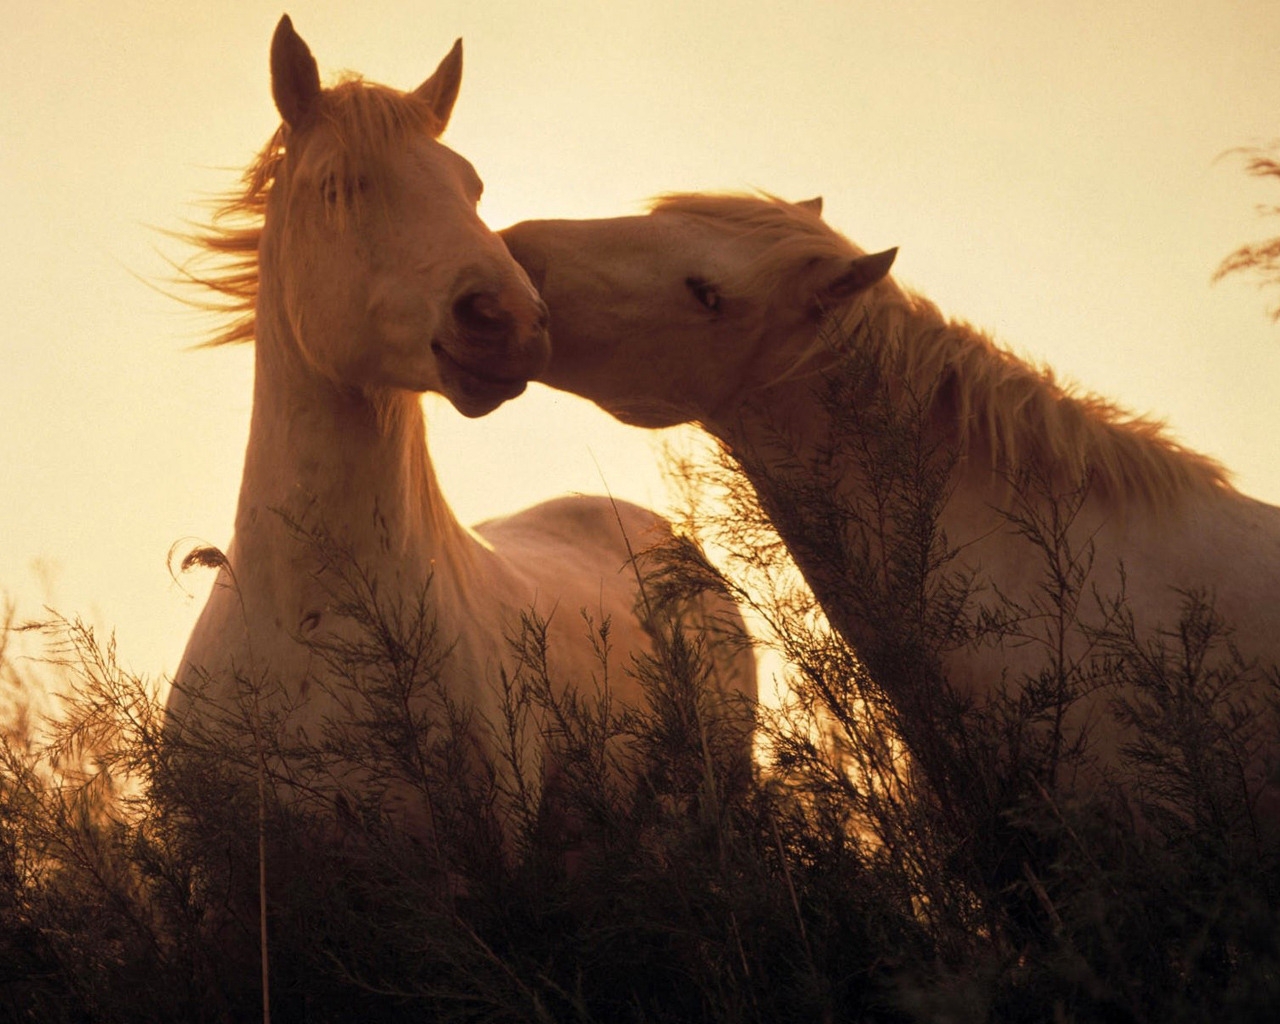 Two horses in love for 1280 x 1024 resolution